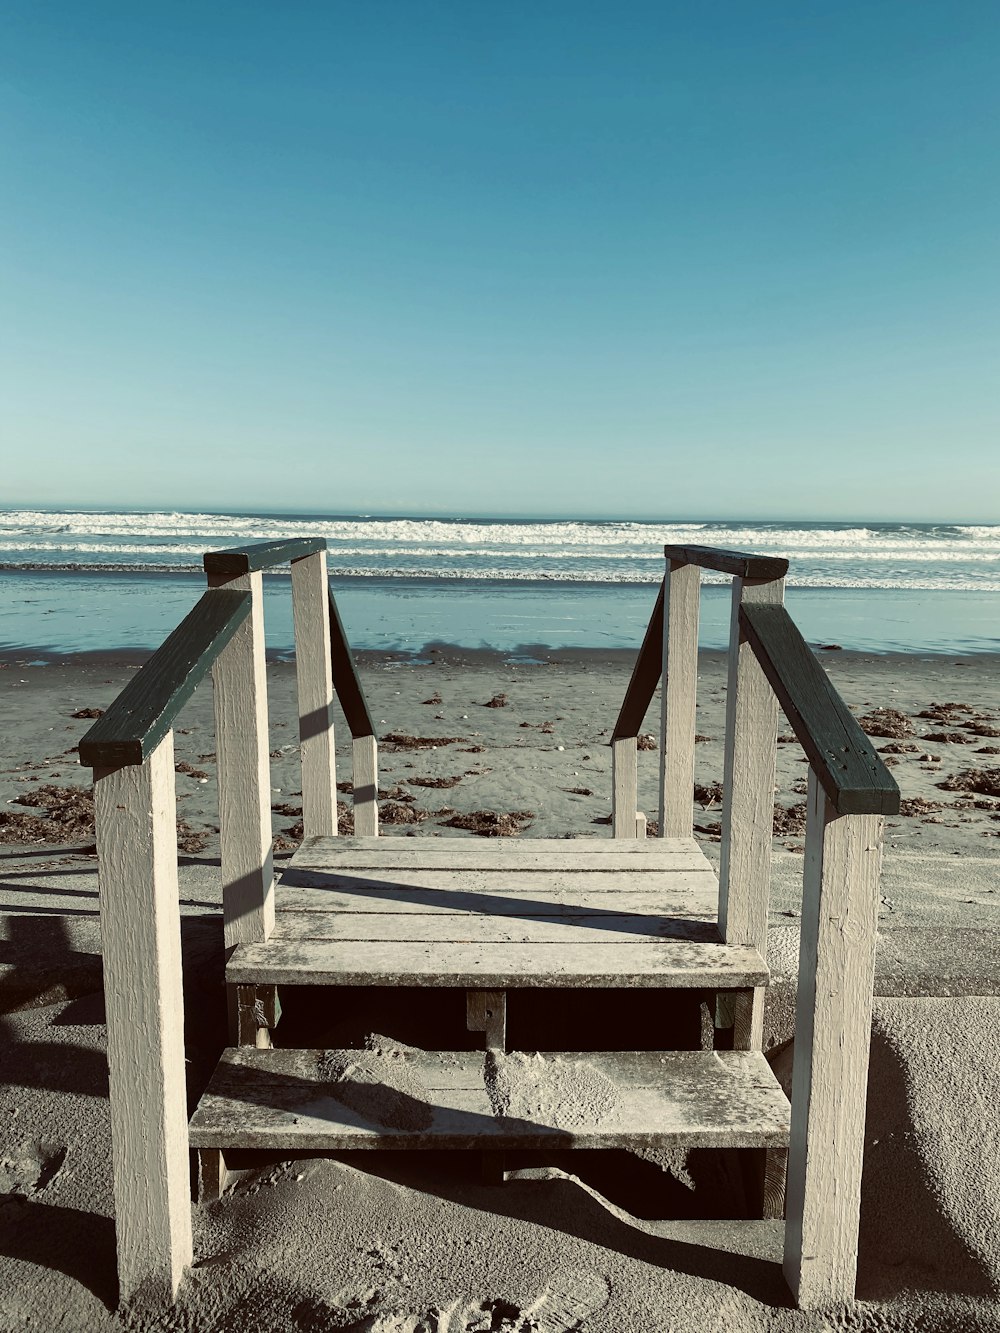 brown wooden stairs on beach during daytime